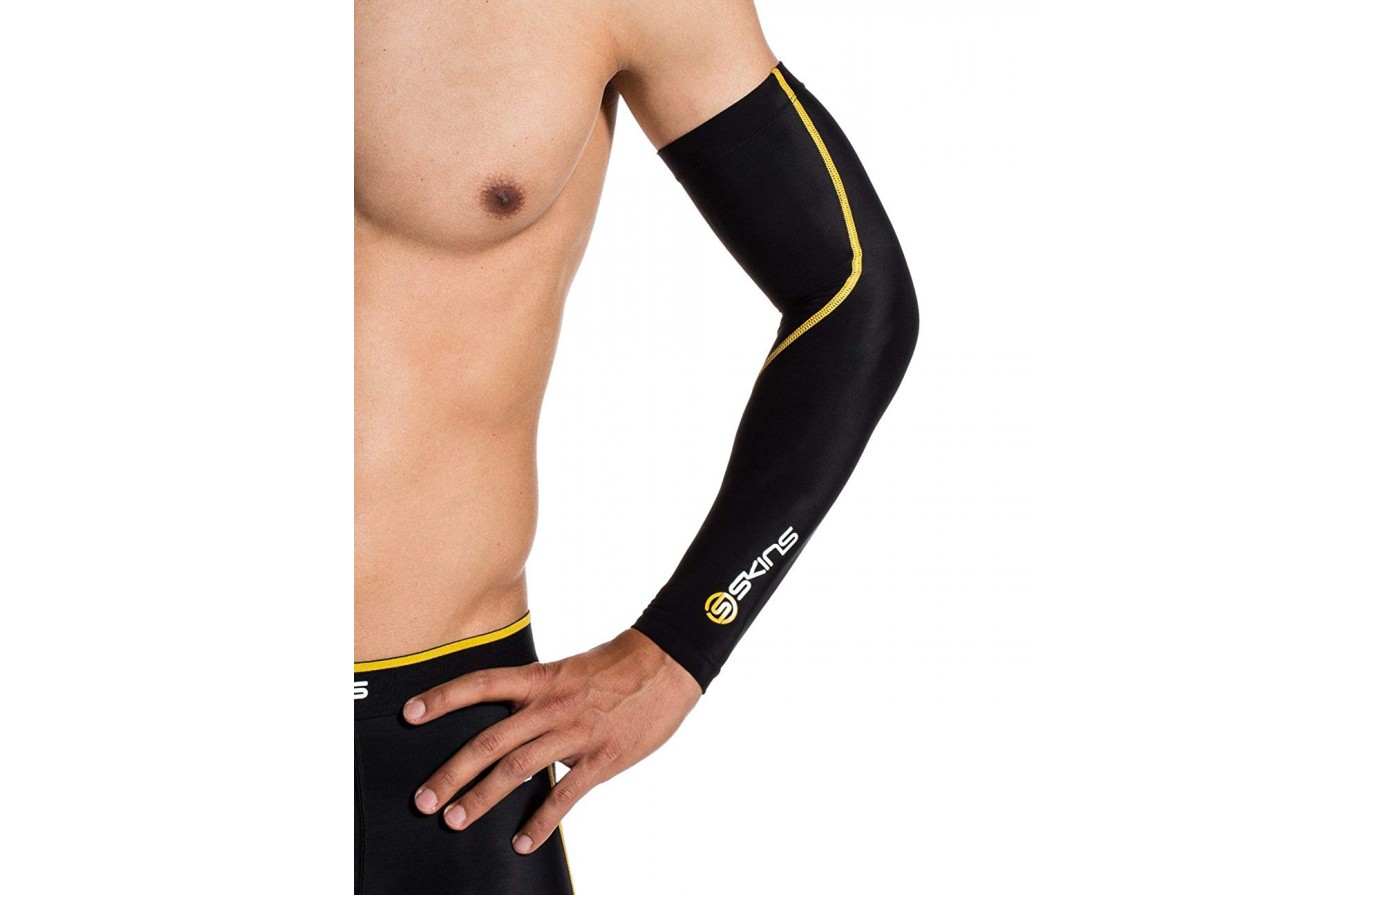 The Skins Compression Arm Sleeves come in a pair to make buying more convenient.